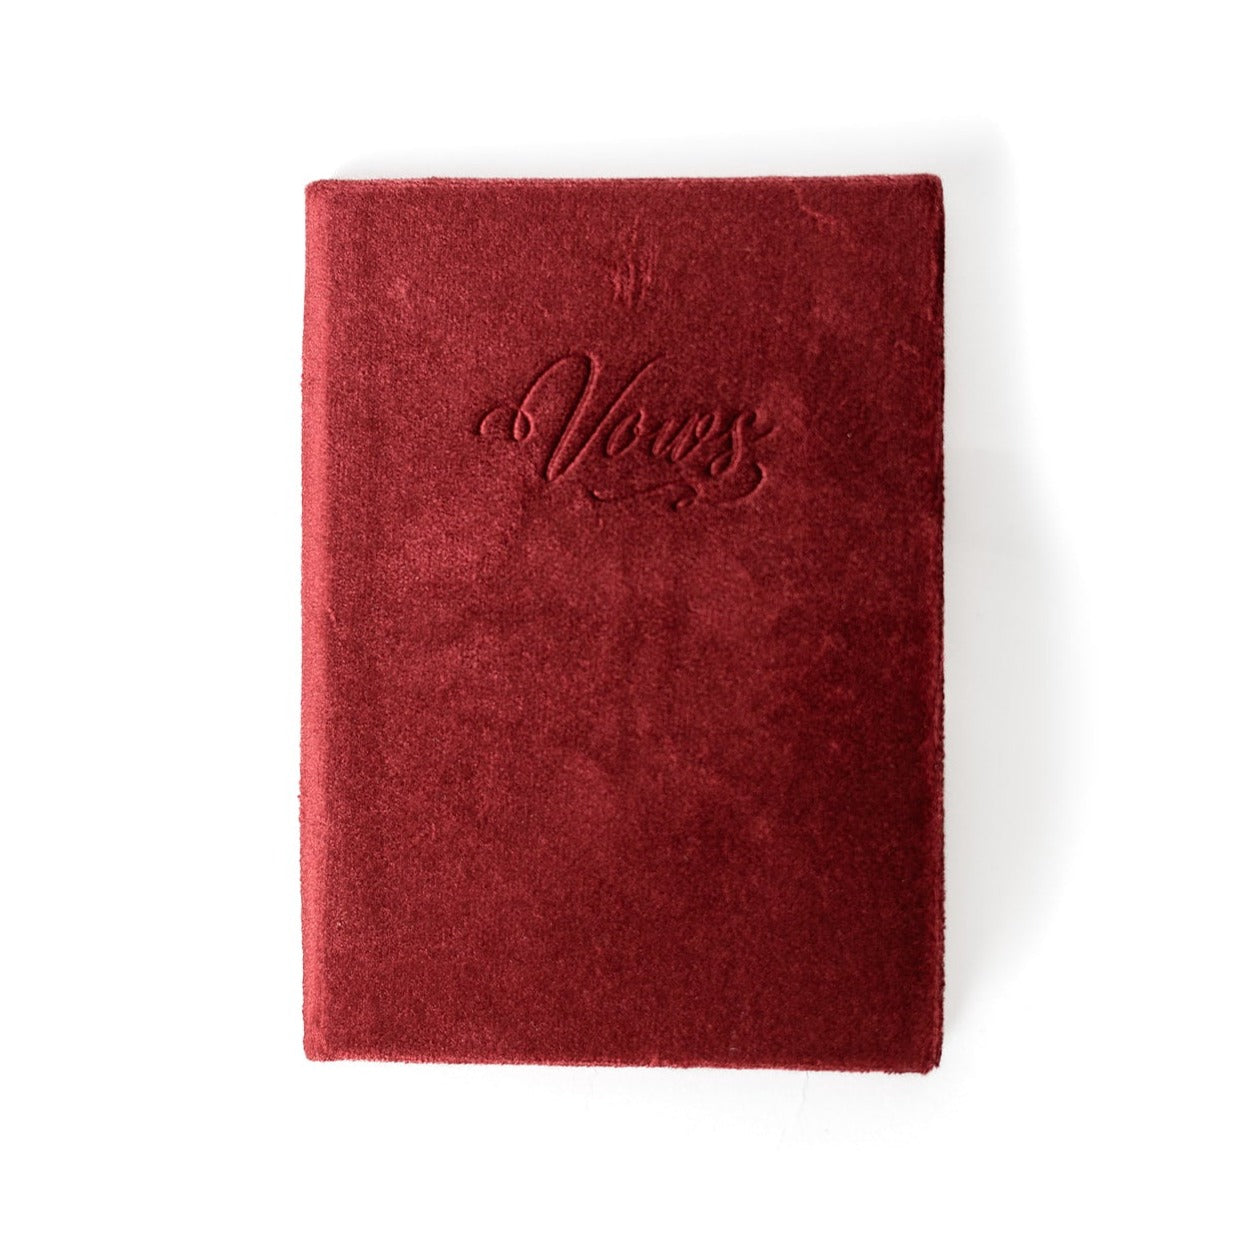 A red vow book with the word "Vows" embossed on the front cover.